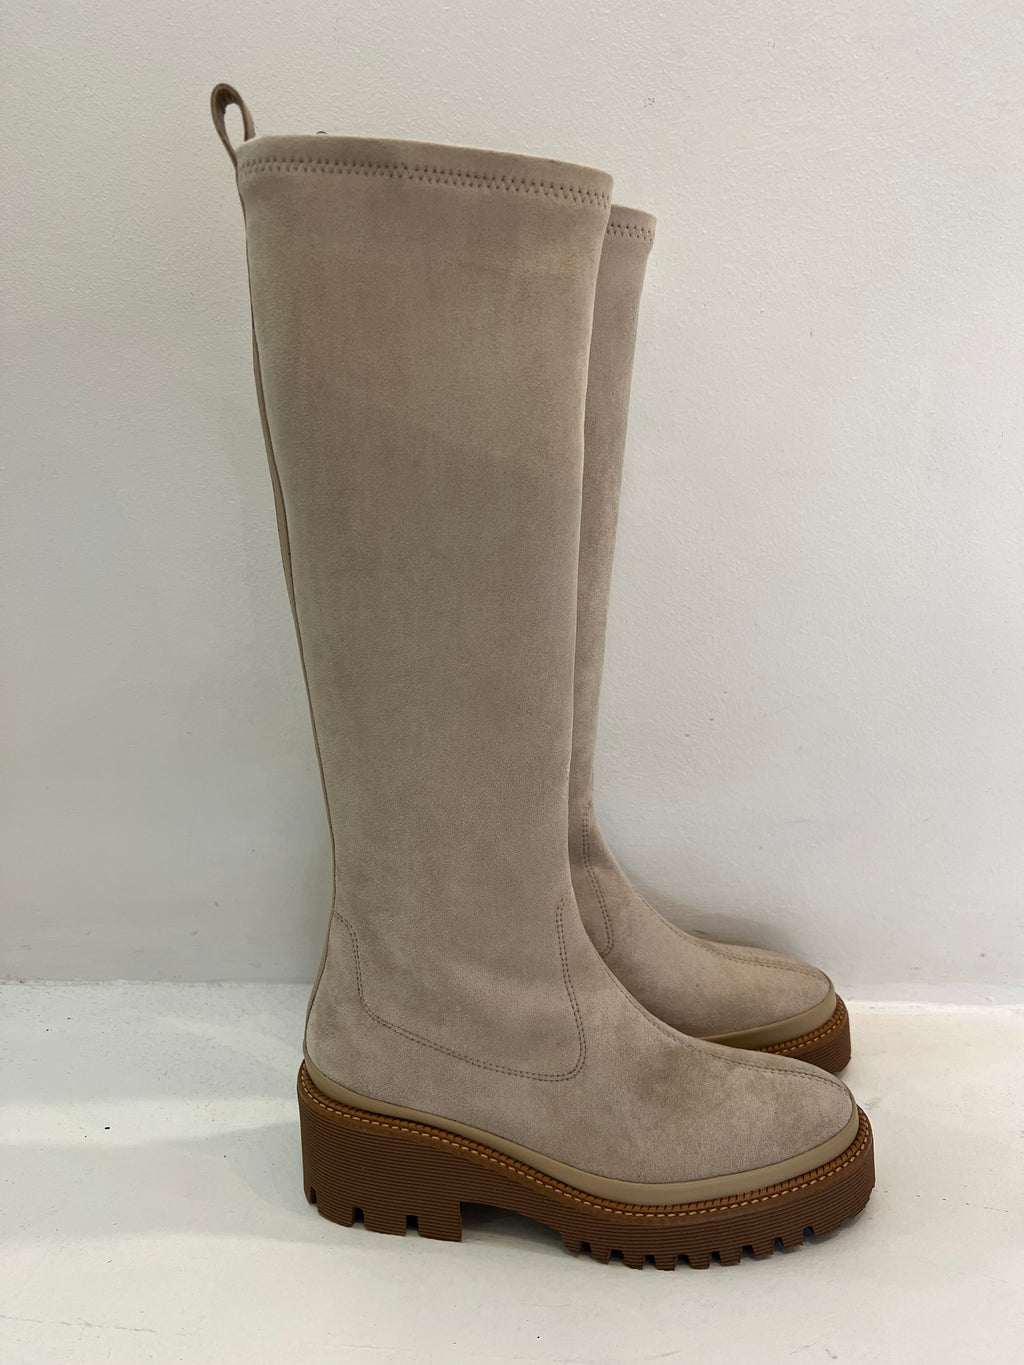 Hetre Alresford Hampshire Shoe Store Pons Quintana Taupe Stretch Long Boot